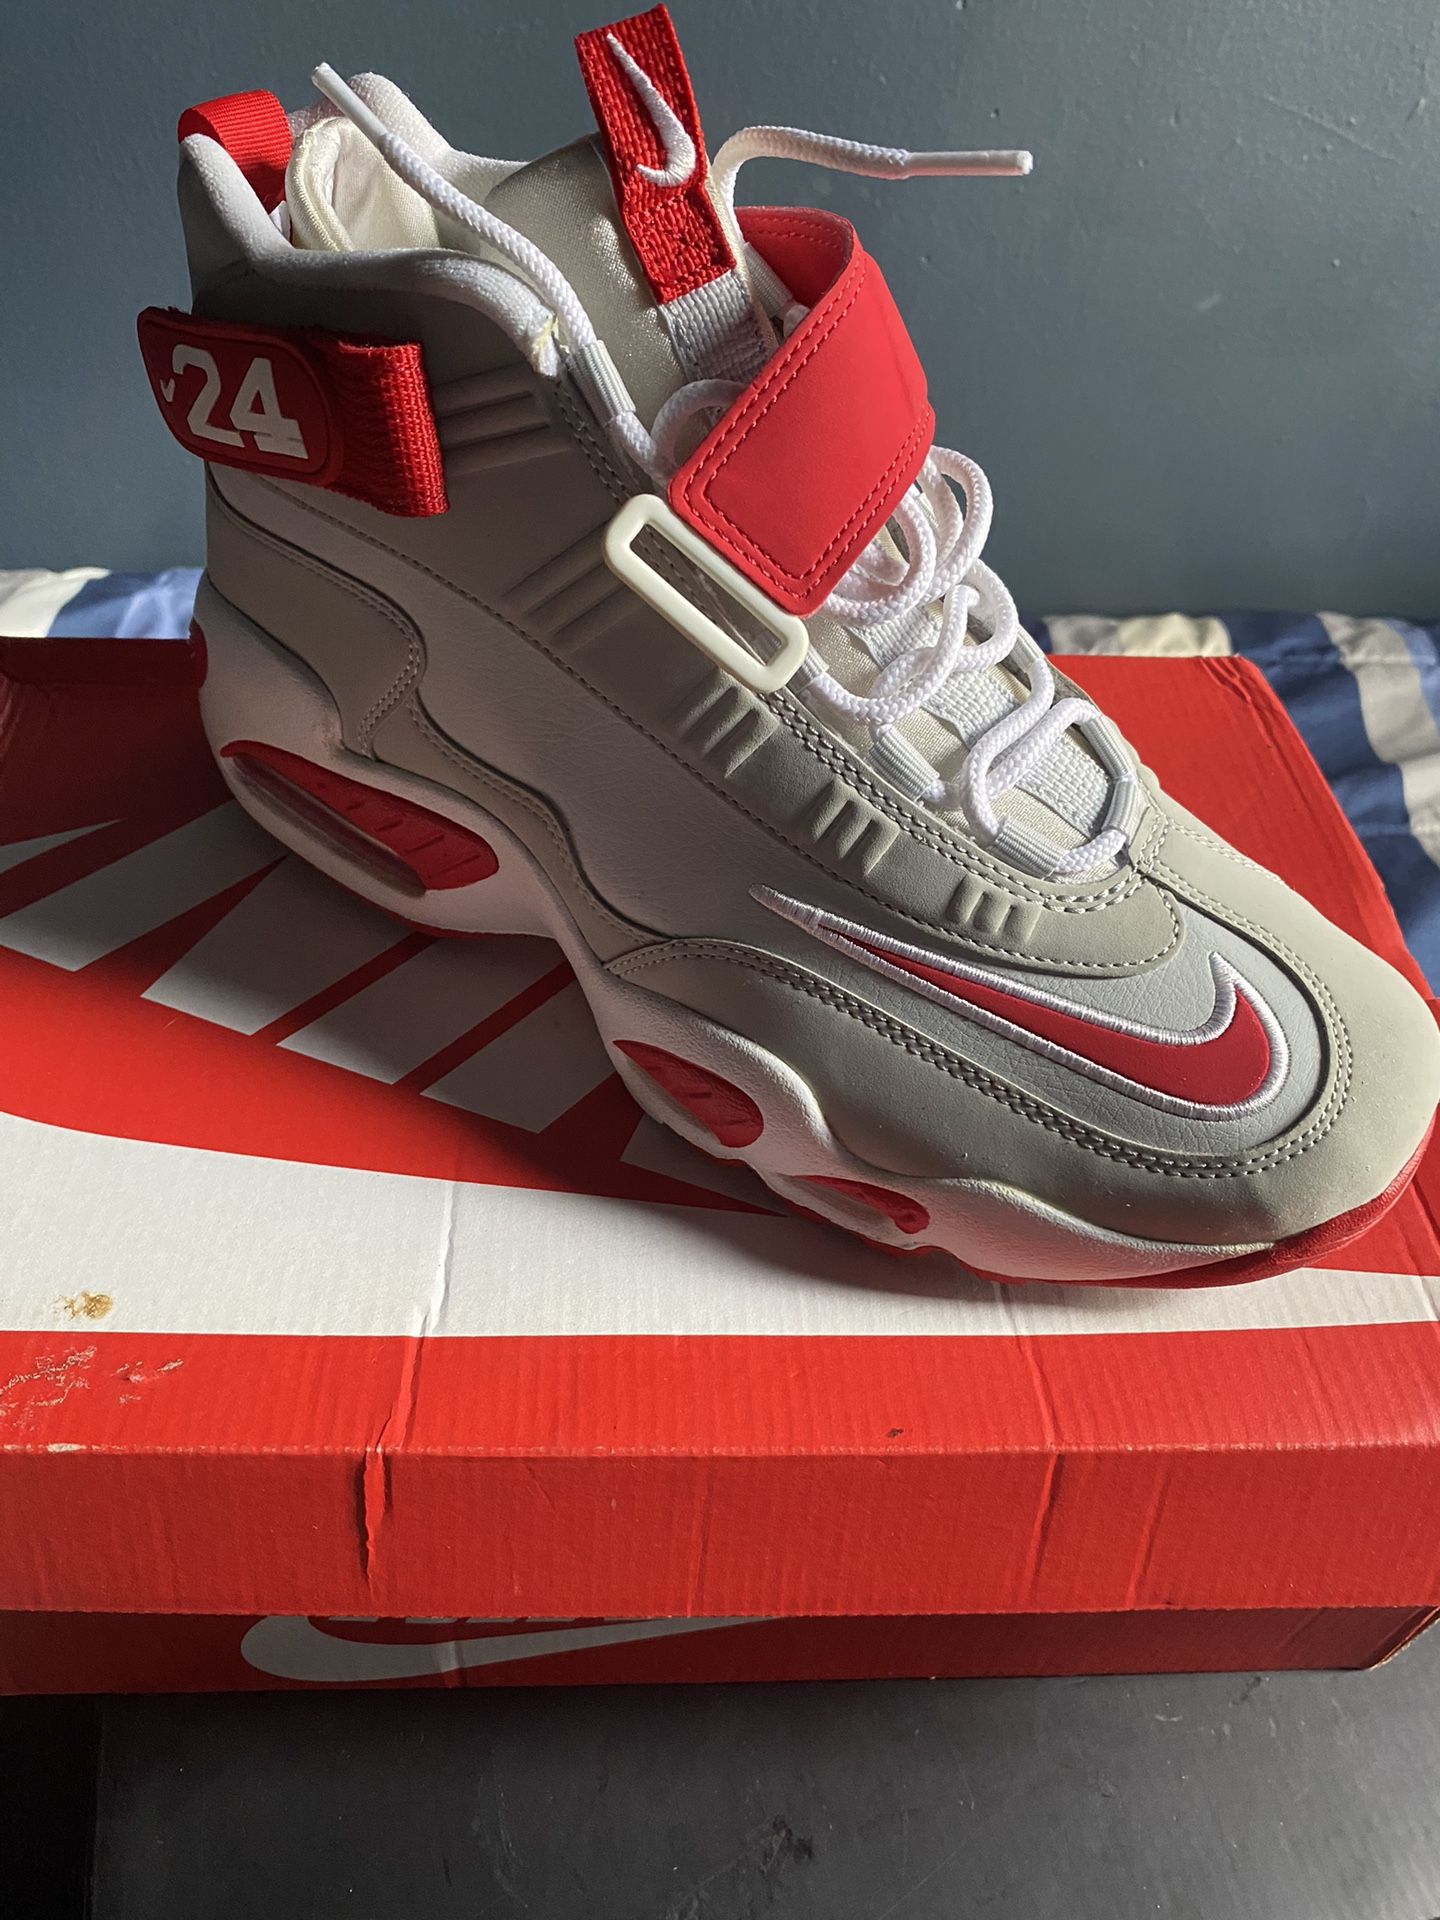 AIR GRIFFEY MAX 1 size 10.5 pure platinum/ university red